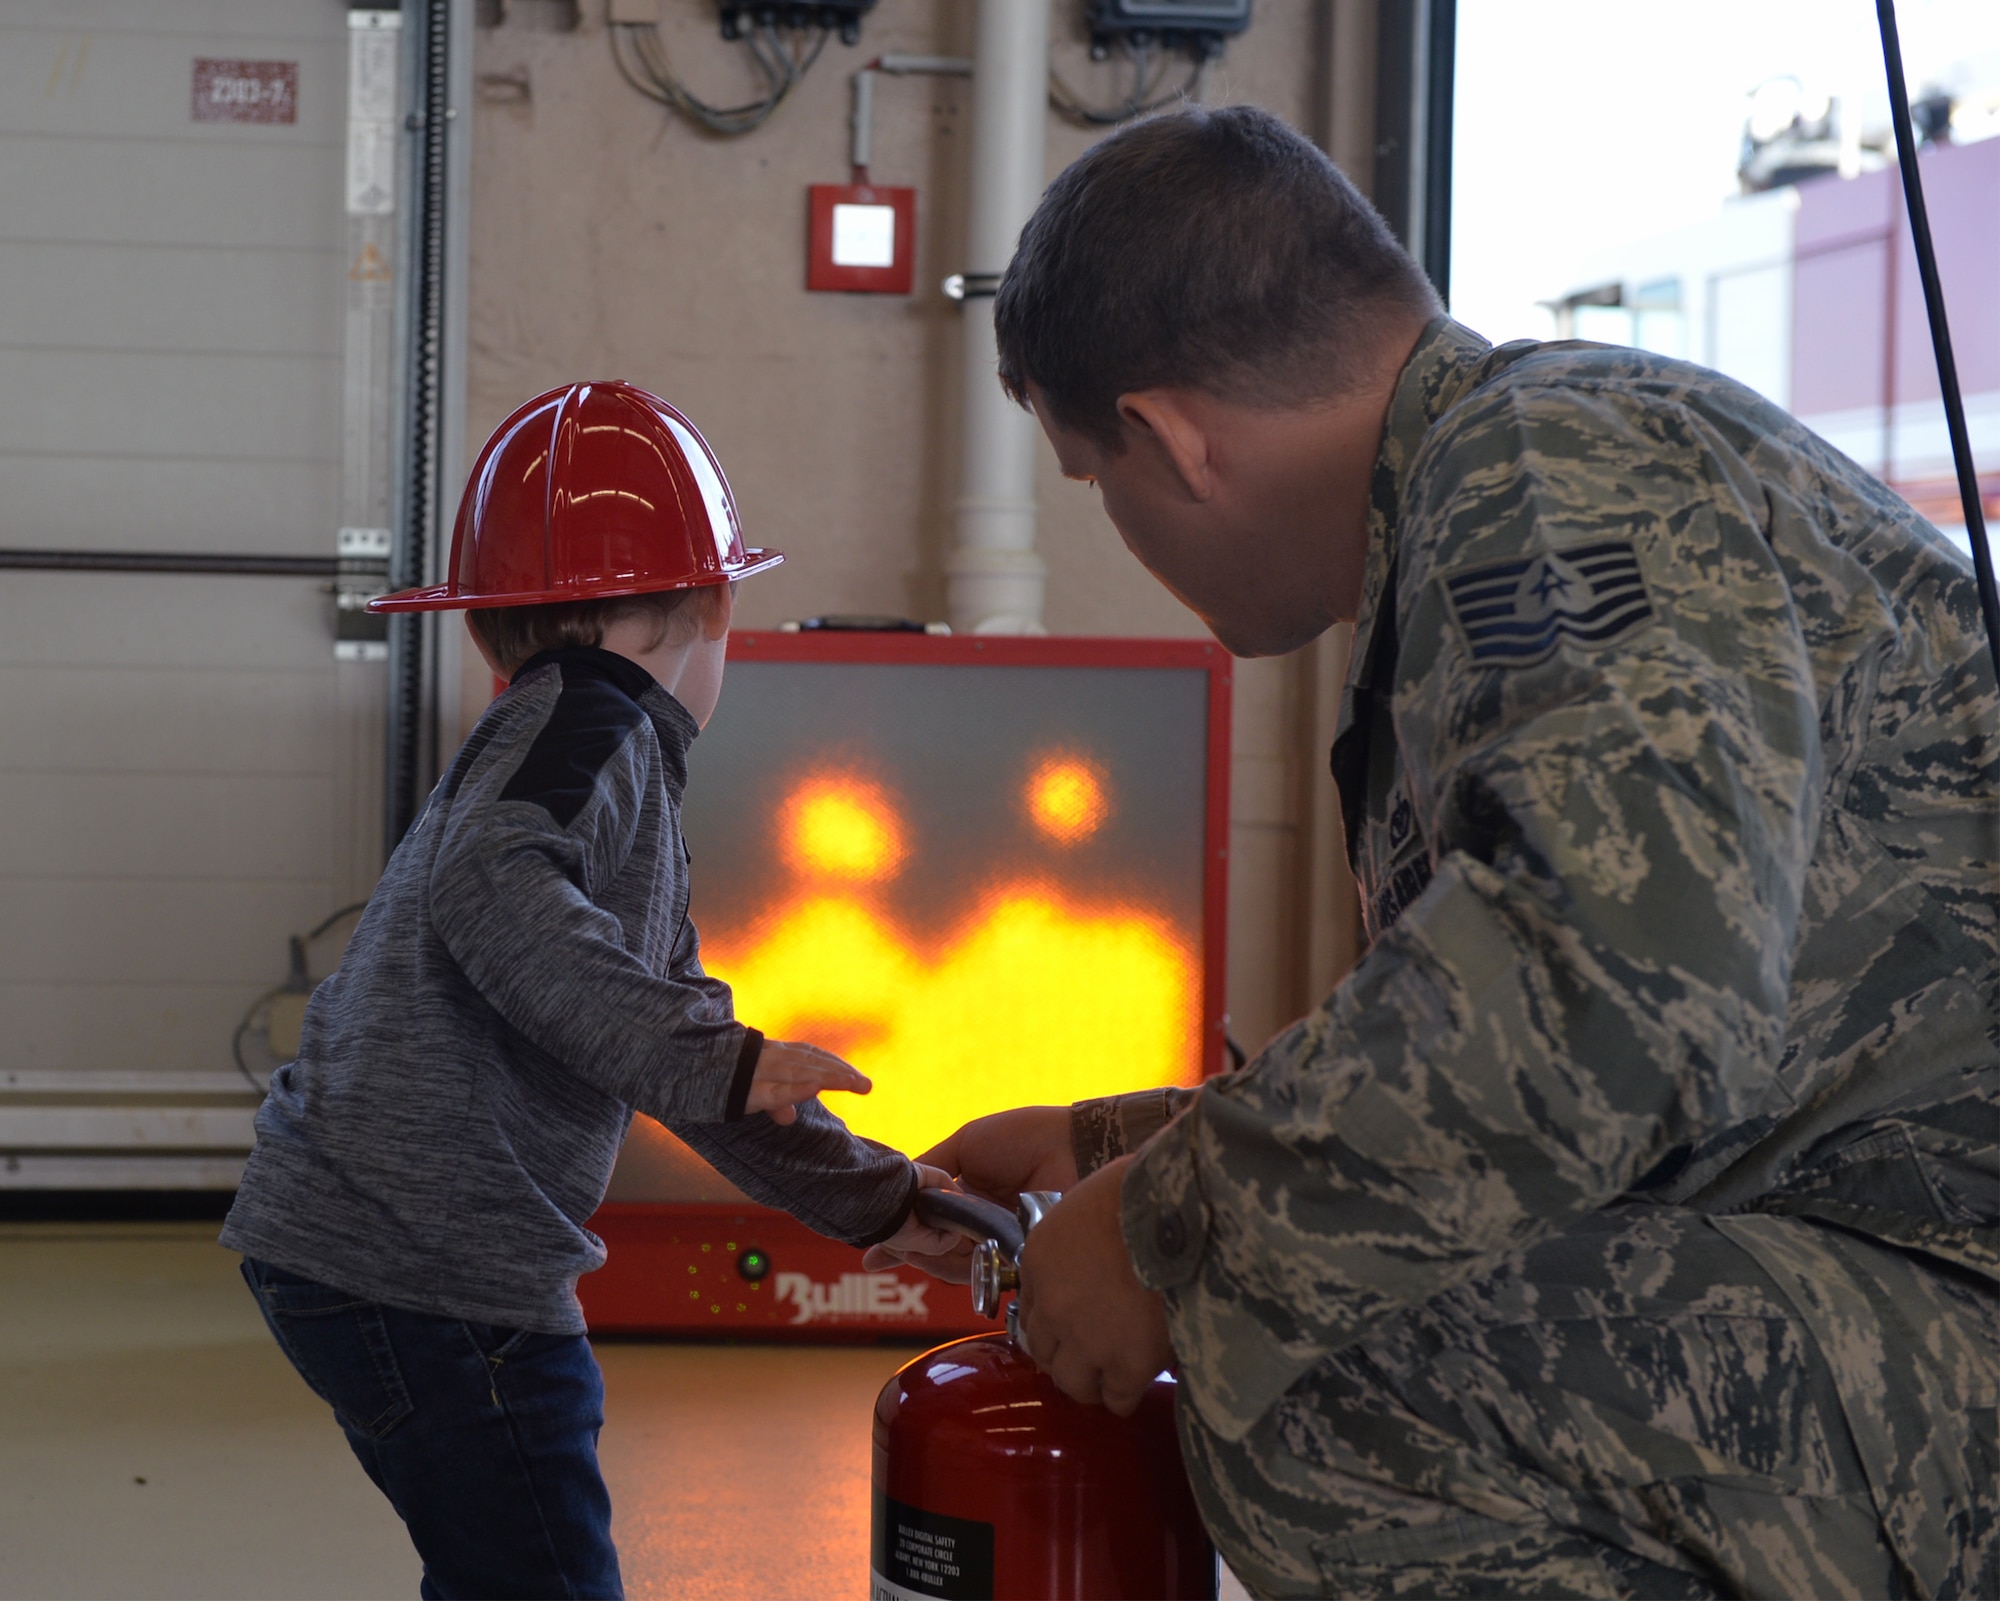 U.S. Air Force Tech. Sgt. James Fligor, 86th Civil Engineer Squadron Station 3 station chief, helps a child put out a simulated fire on a fire extinguisher trainer on Ramstein Air Base, Germany, Oct. 6, 2018. Members of the Kaiserslautern Military Community Fire and Emergency Services came together during Fire Prevention Week to help raise awareness of the importance of fire safety. (U.S. Air Force photo by Staff Sgt. Jimmie D. Pike)